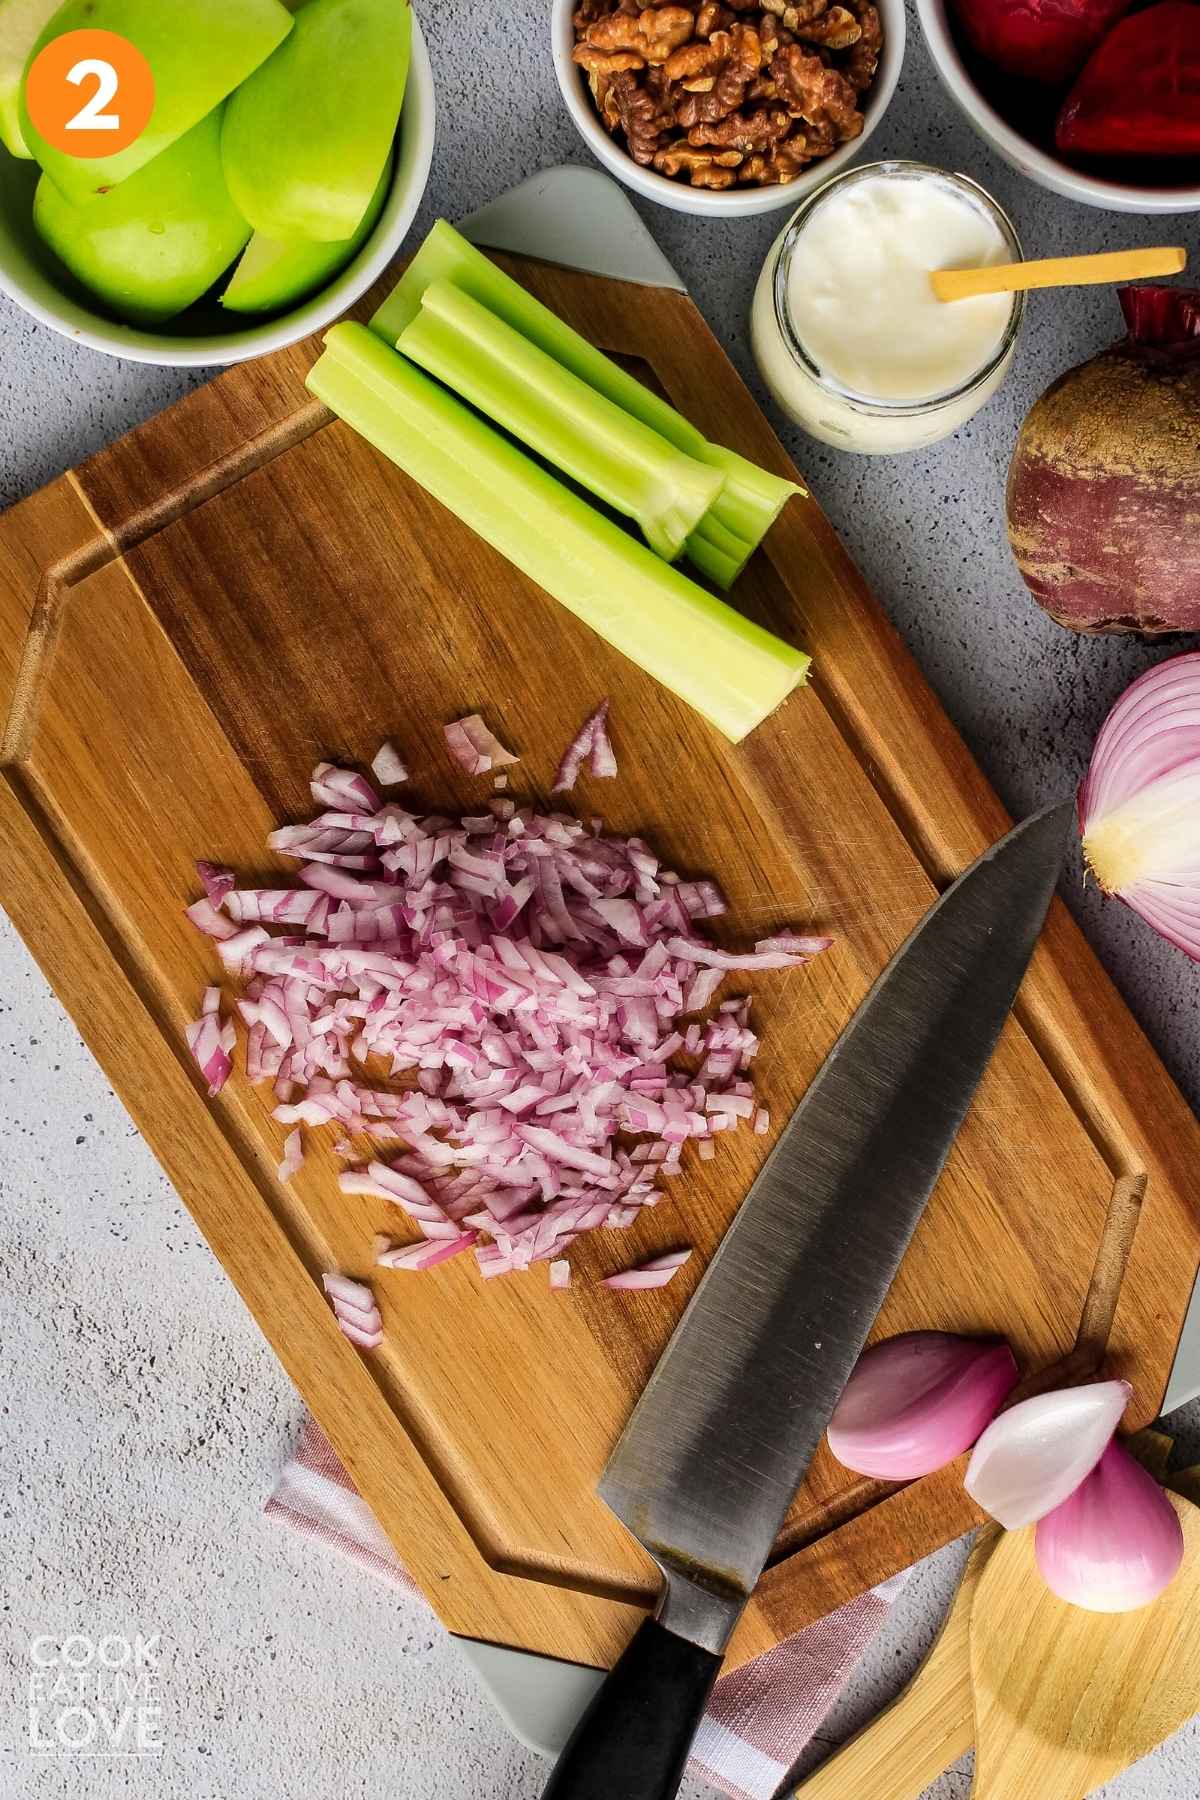 Diced onions on a cutting board with a knife to the side.